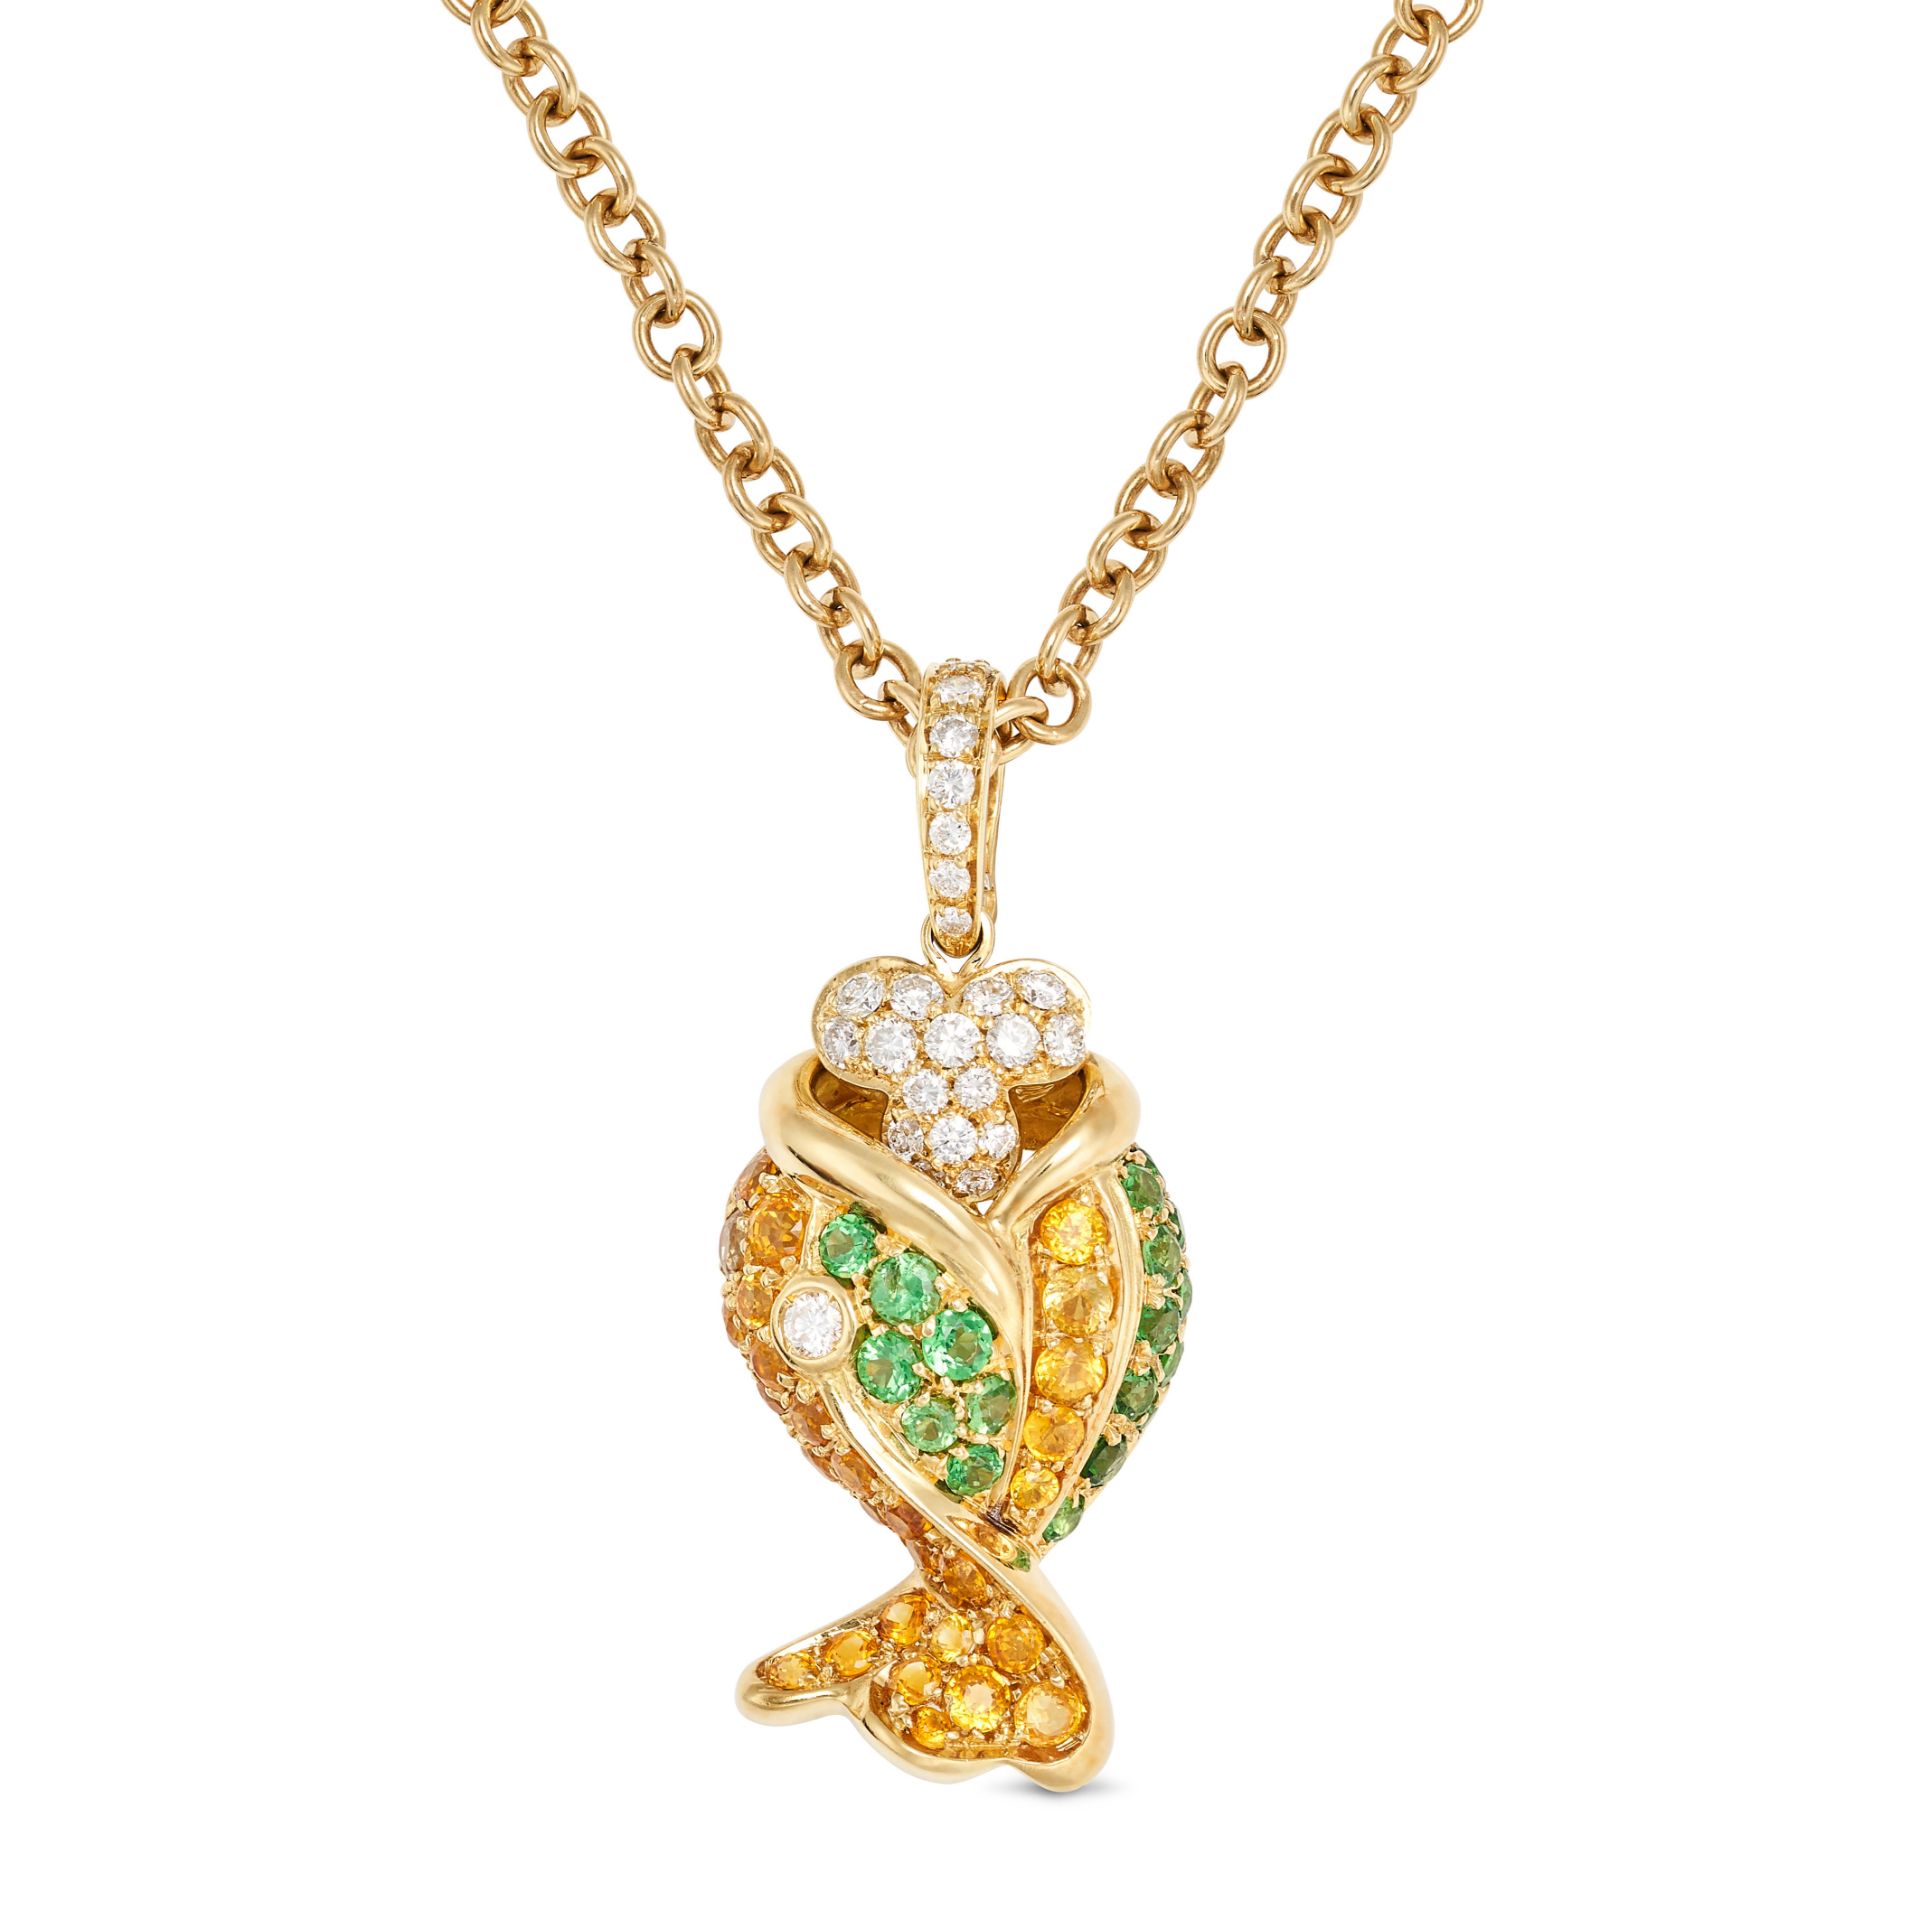 A GEMSET FISH PENDANT NECKLACE in 18ct yellow gold, the pendant designed as a fish set throughout...